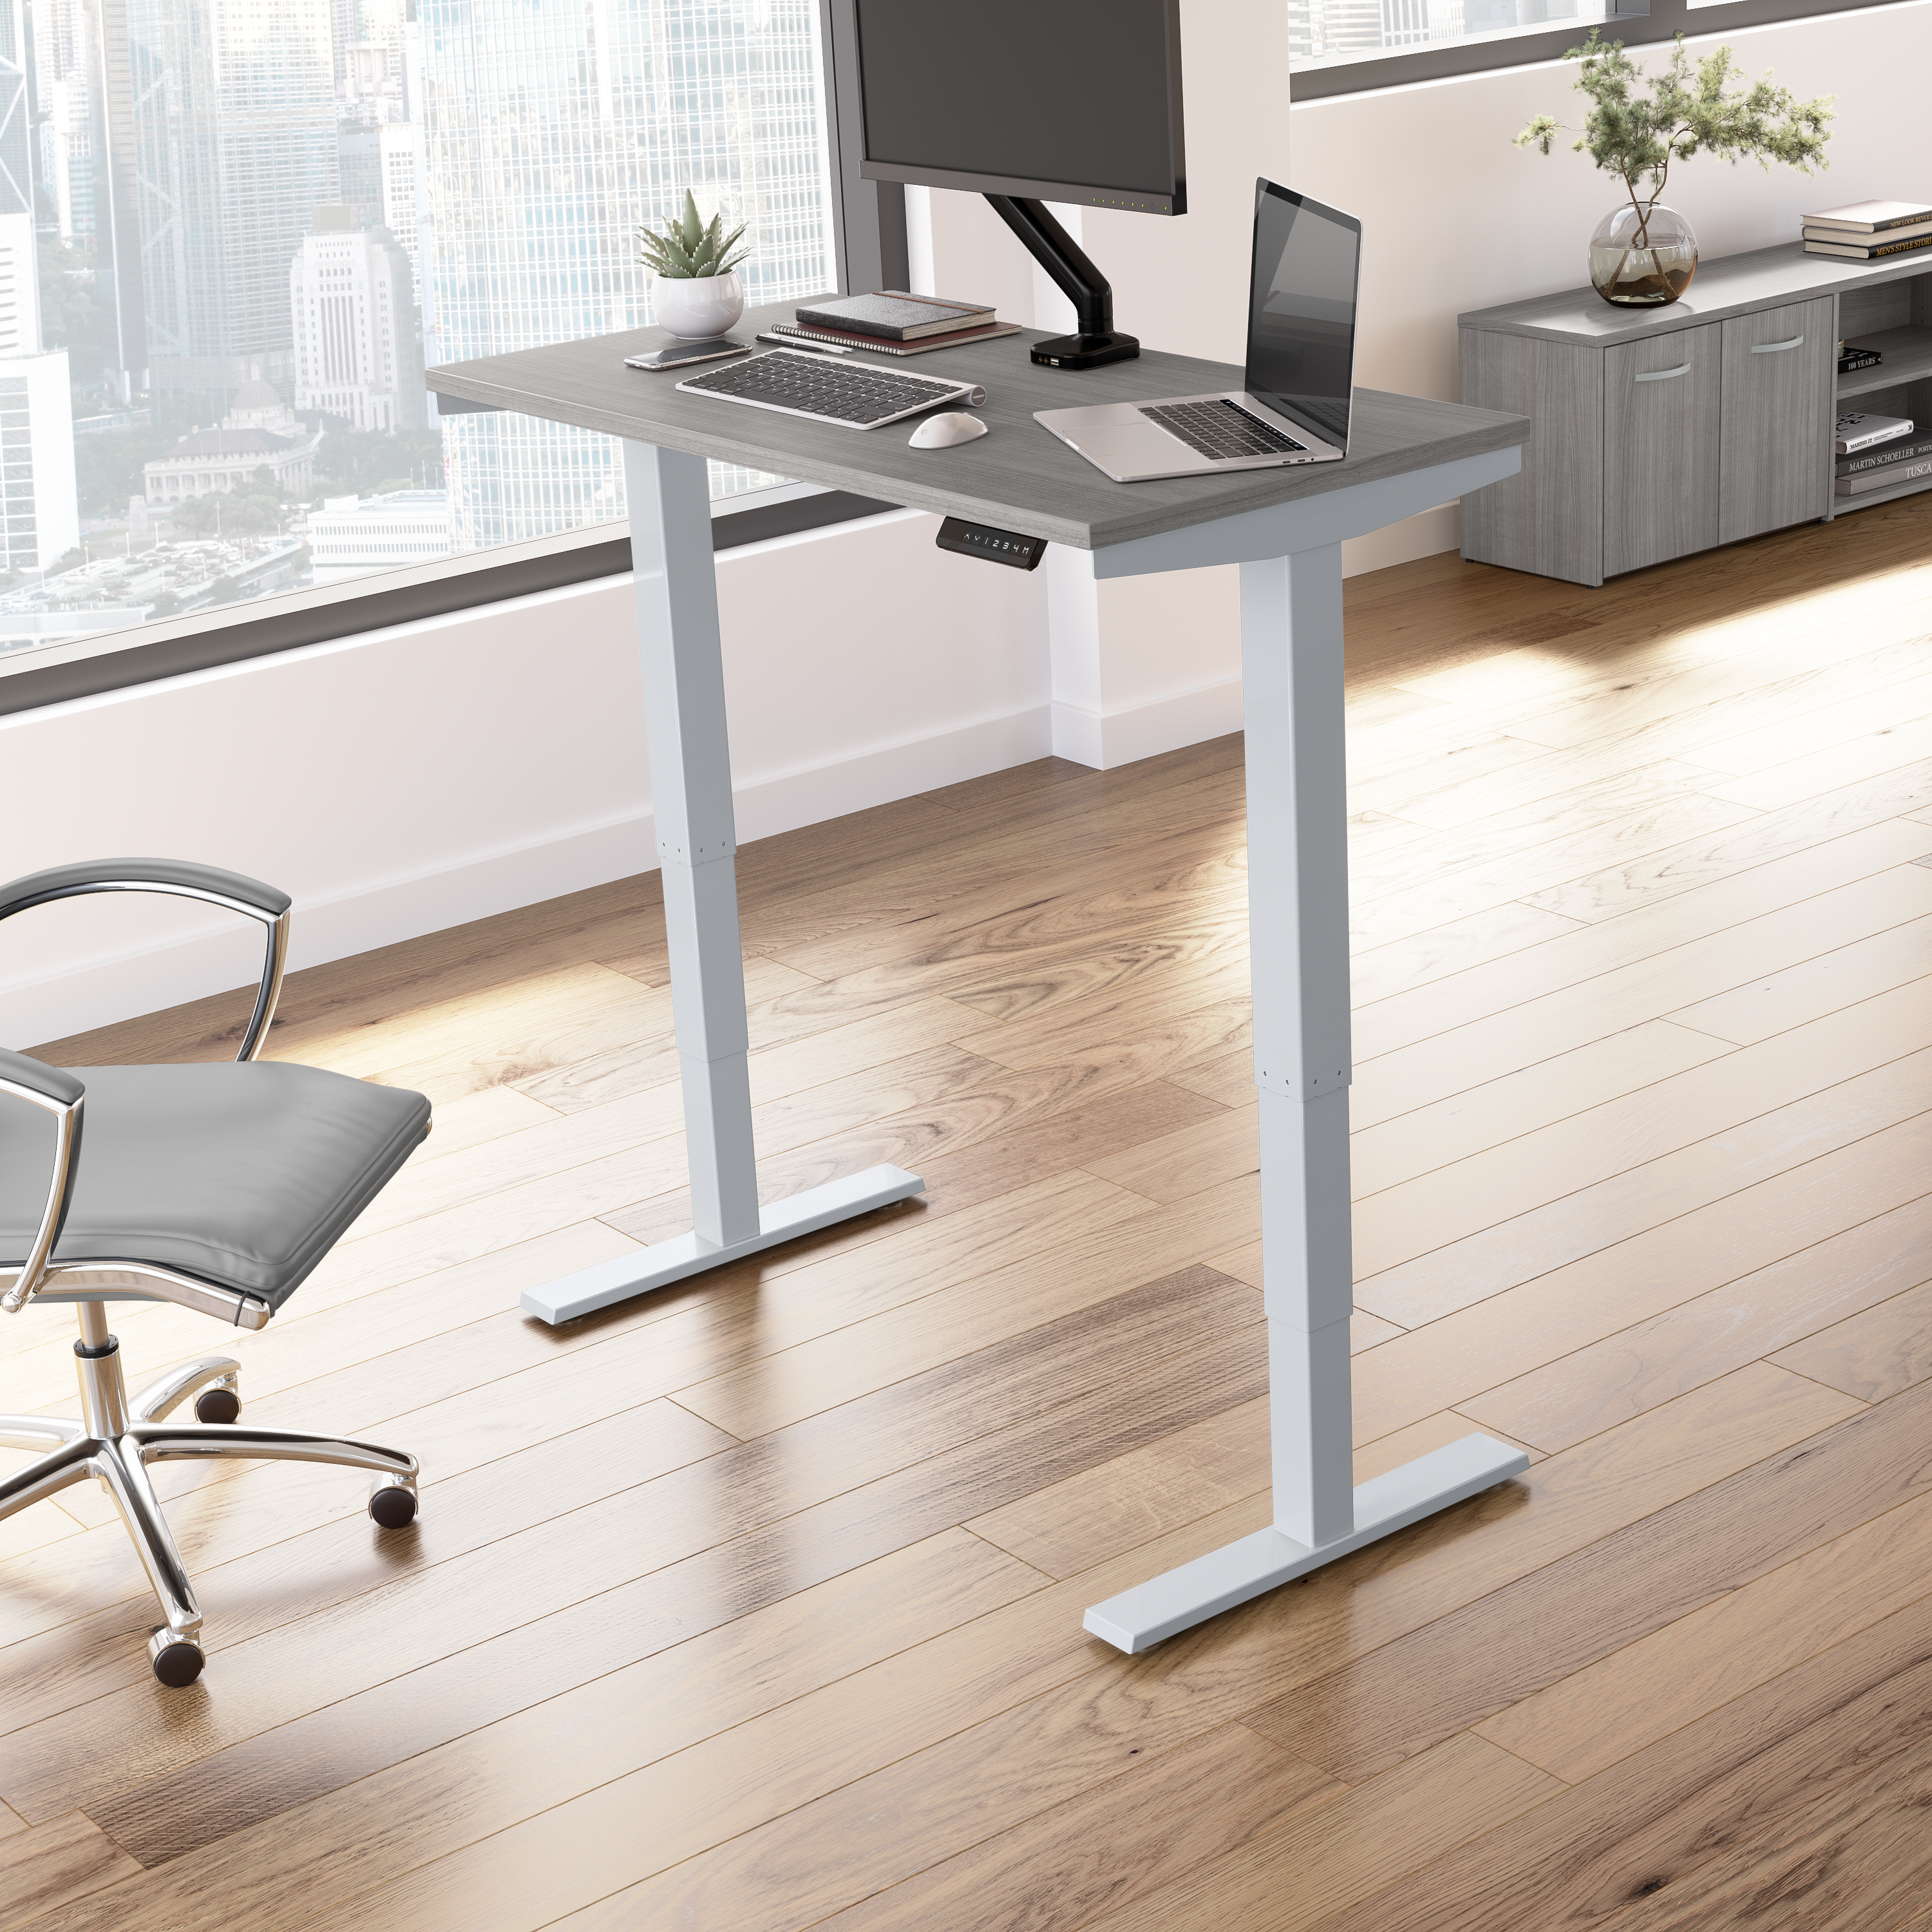 Shop Move 40 Series by Bush Business Furniture 48W x 24D Electric Height Adjustable Standing Desk 01 M4S4824PGSK #color_platinum gray/cool gray metallic